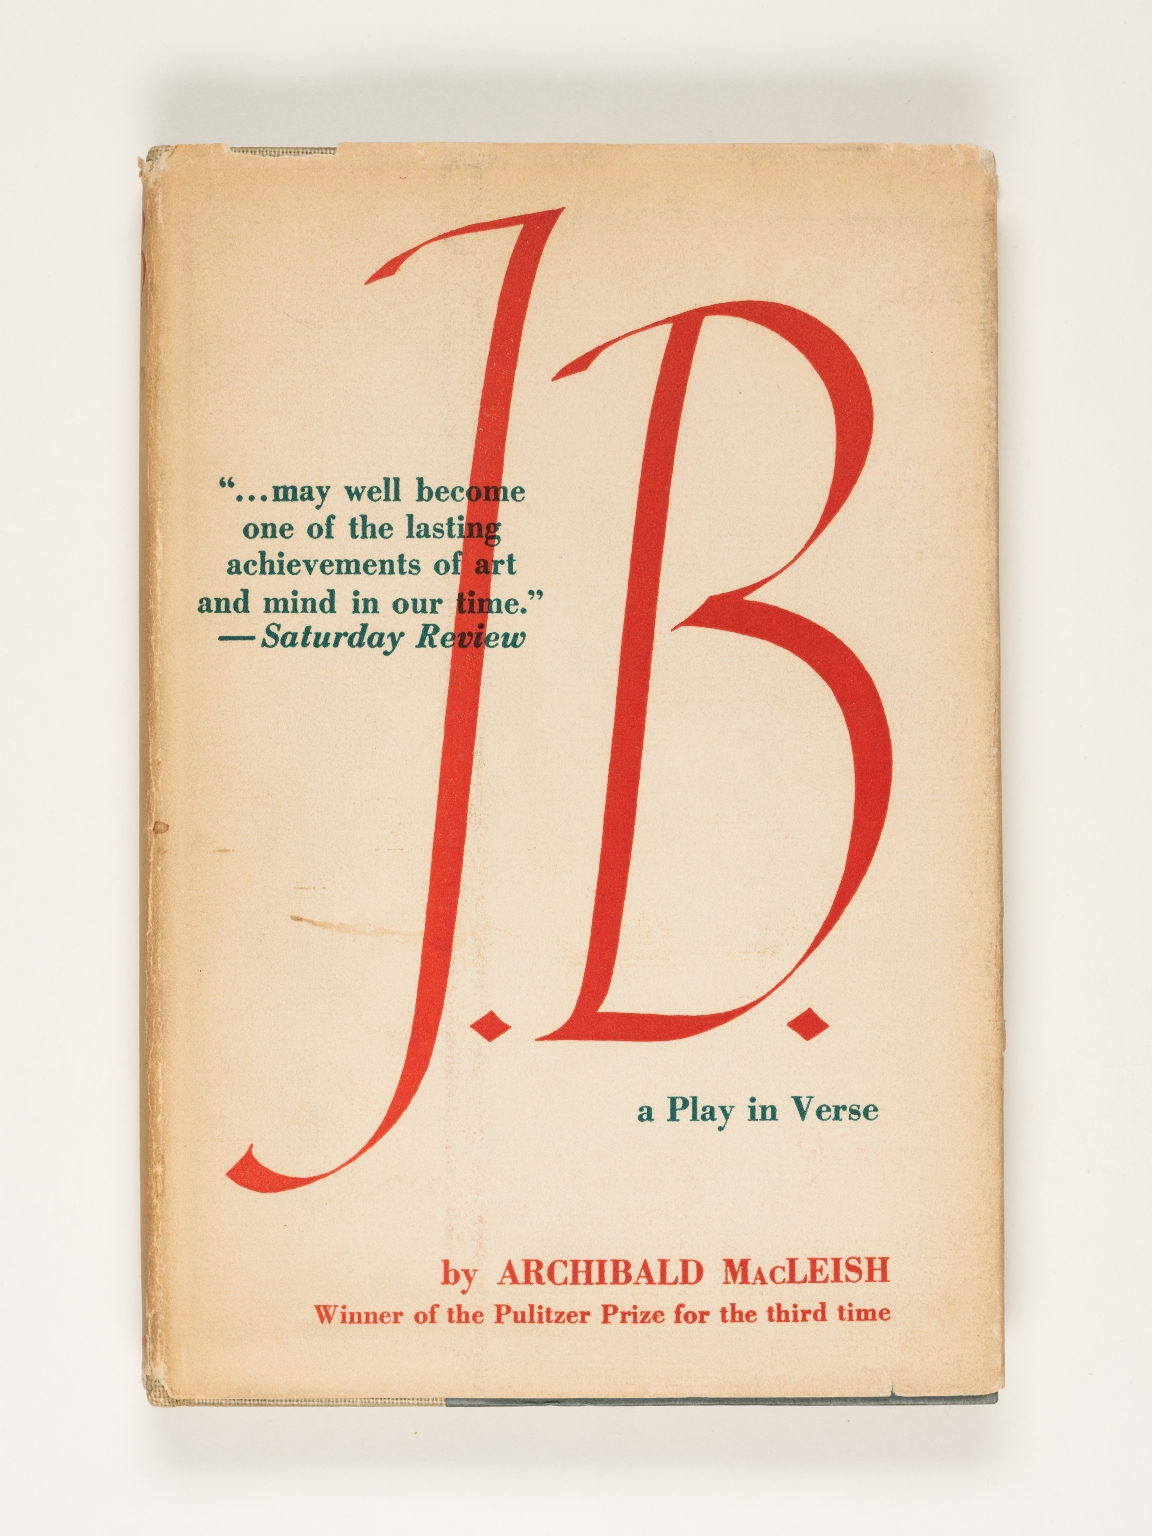 Book jacket "J. B.: A Play in Verse"